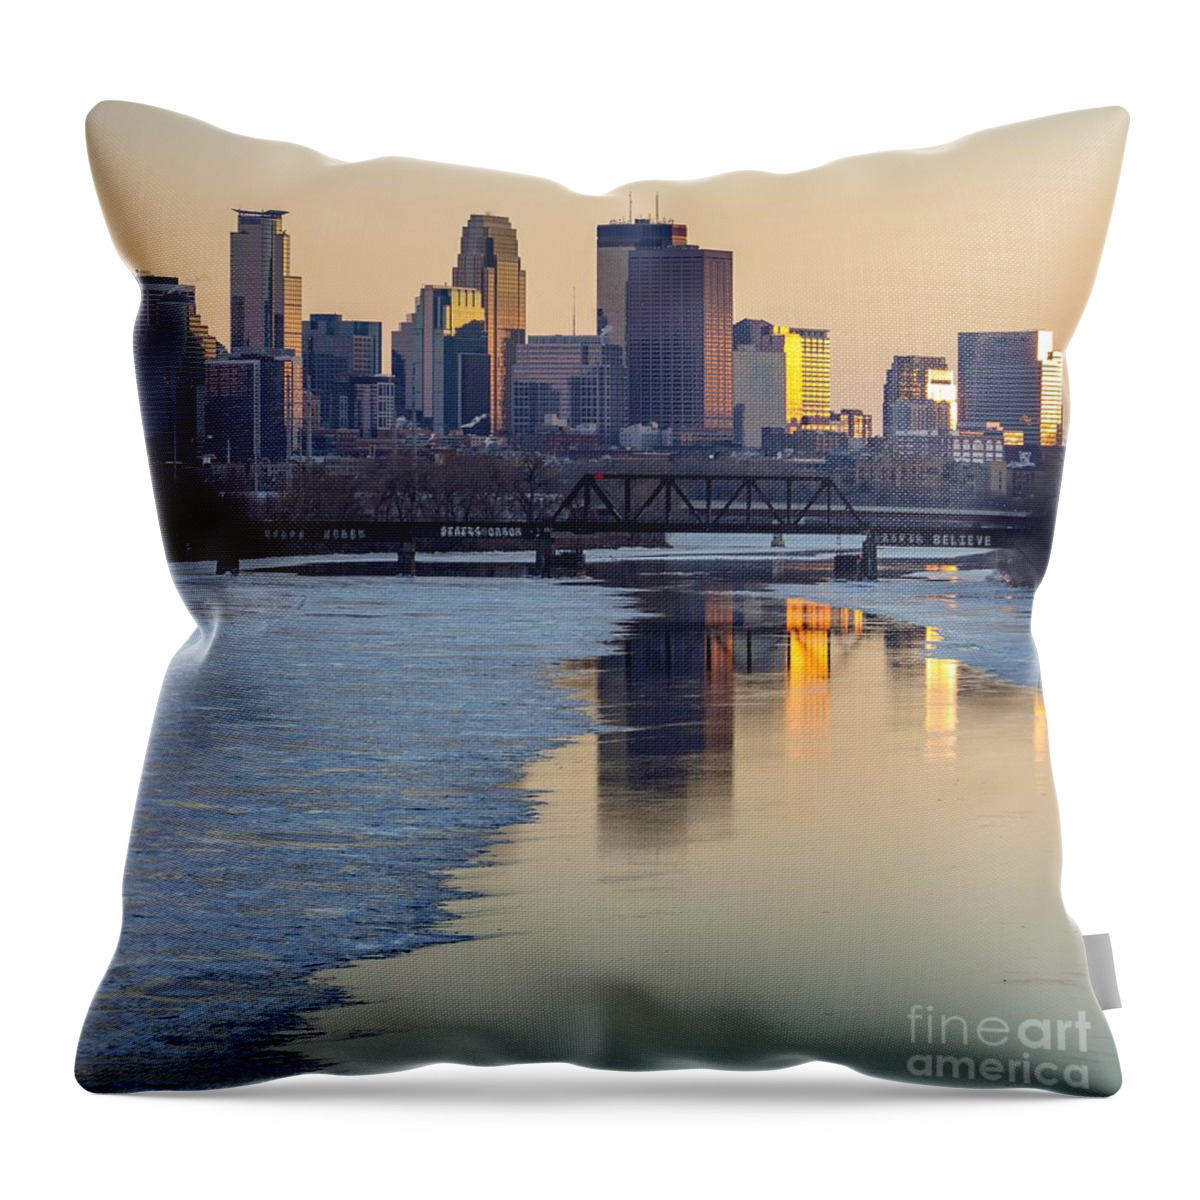 Minneapolis Throw Pillow featuring the photograph Minneapolis Skyline At Sunset 2 by Susan Rydberg